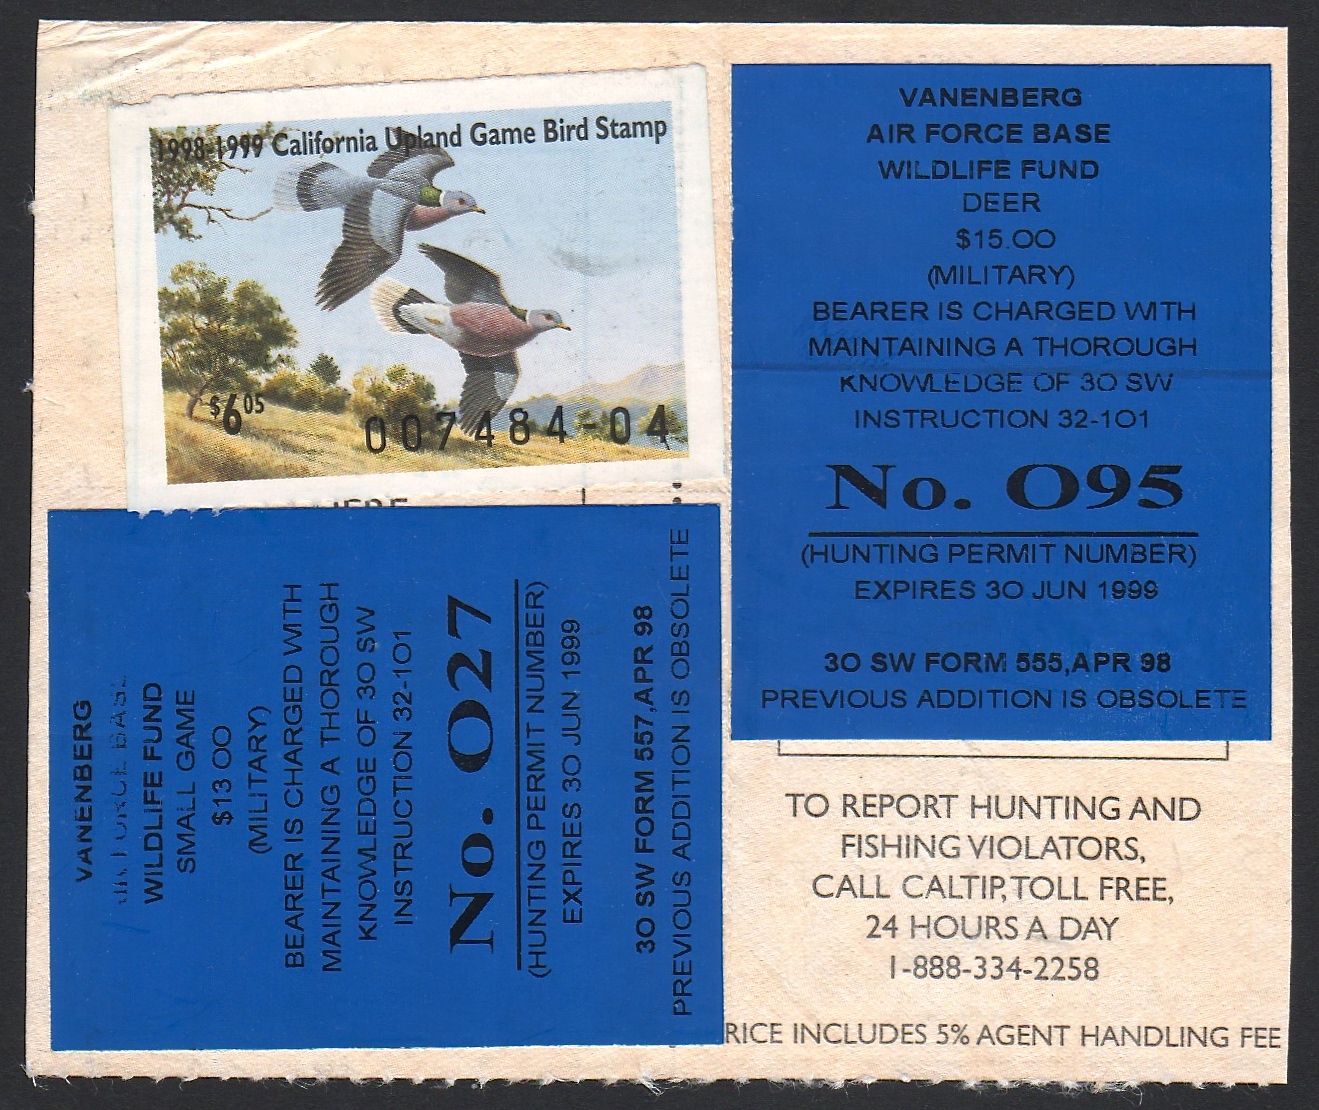 1998-99 VAFB Deer and Small Game on License